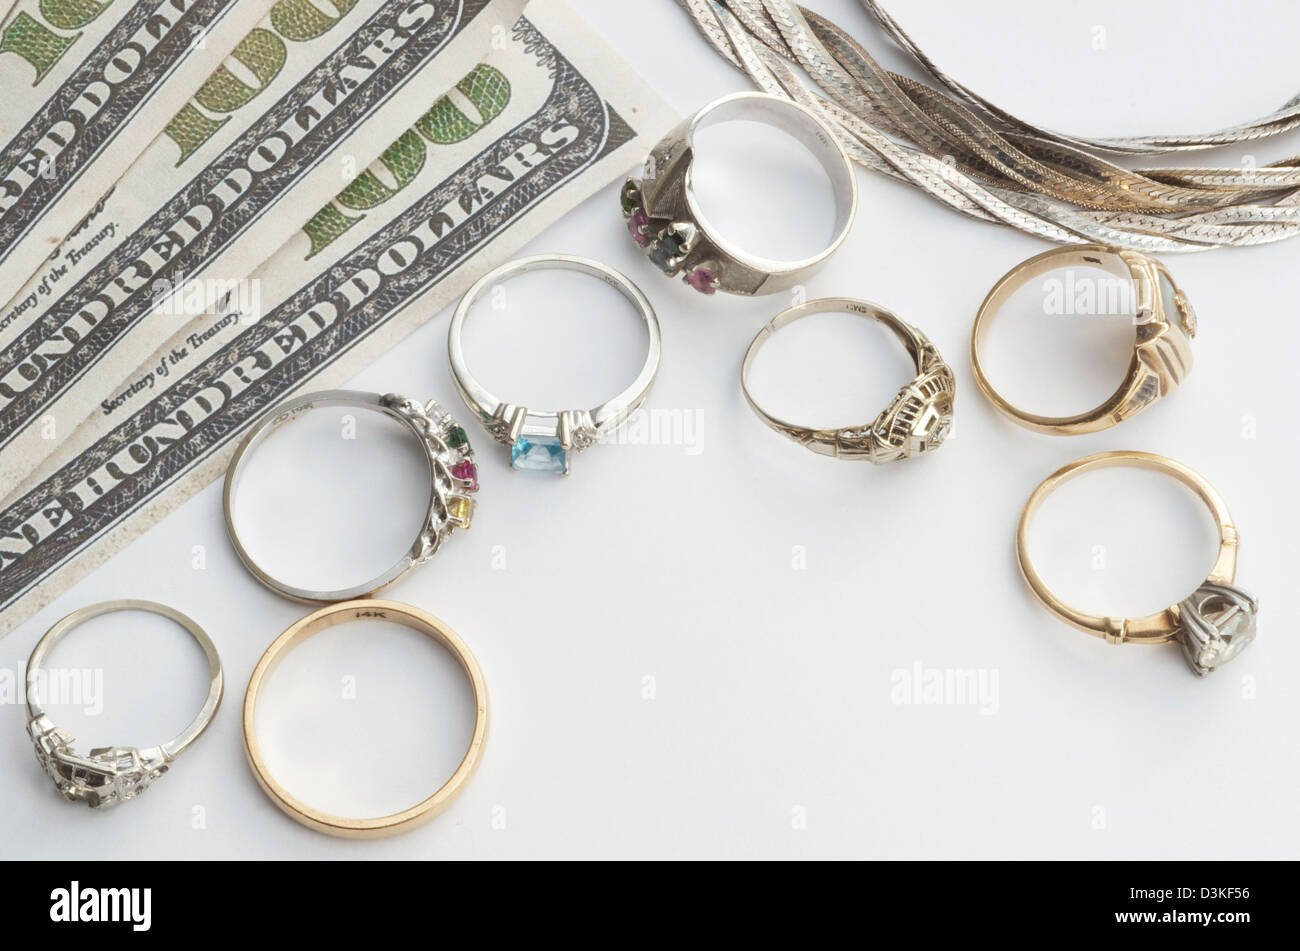 Cash for gold,trade your jewelry for hundreds of dollars Stock Photo